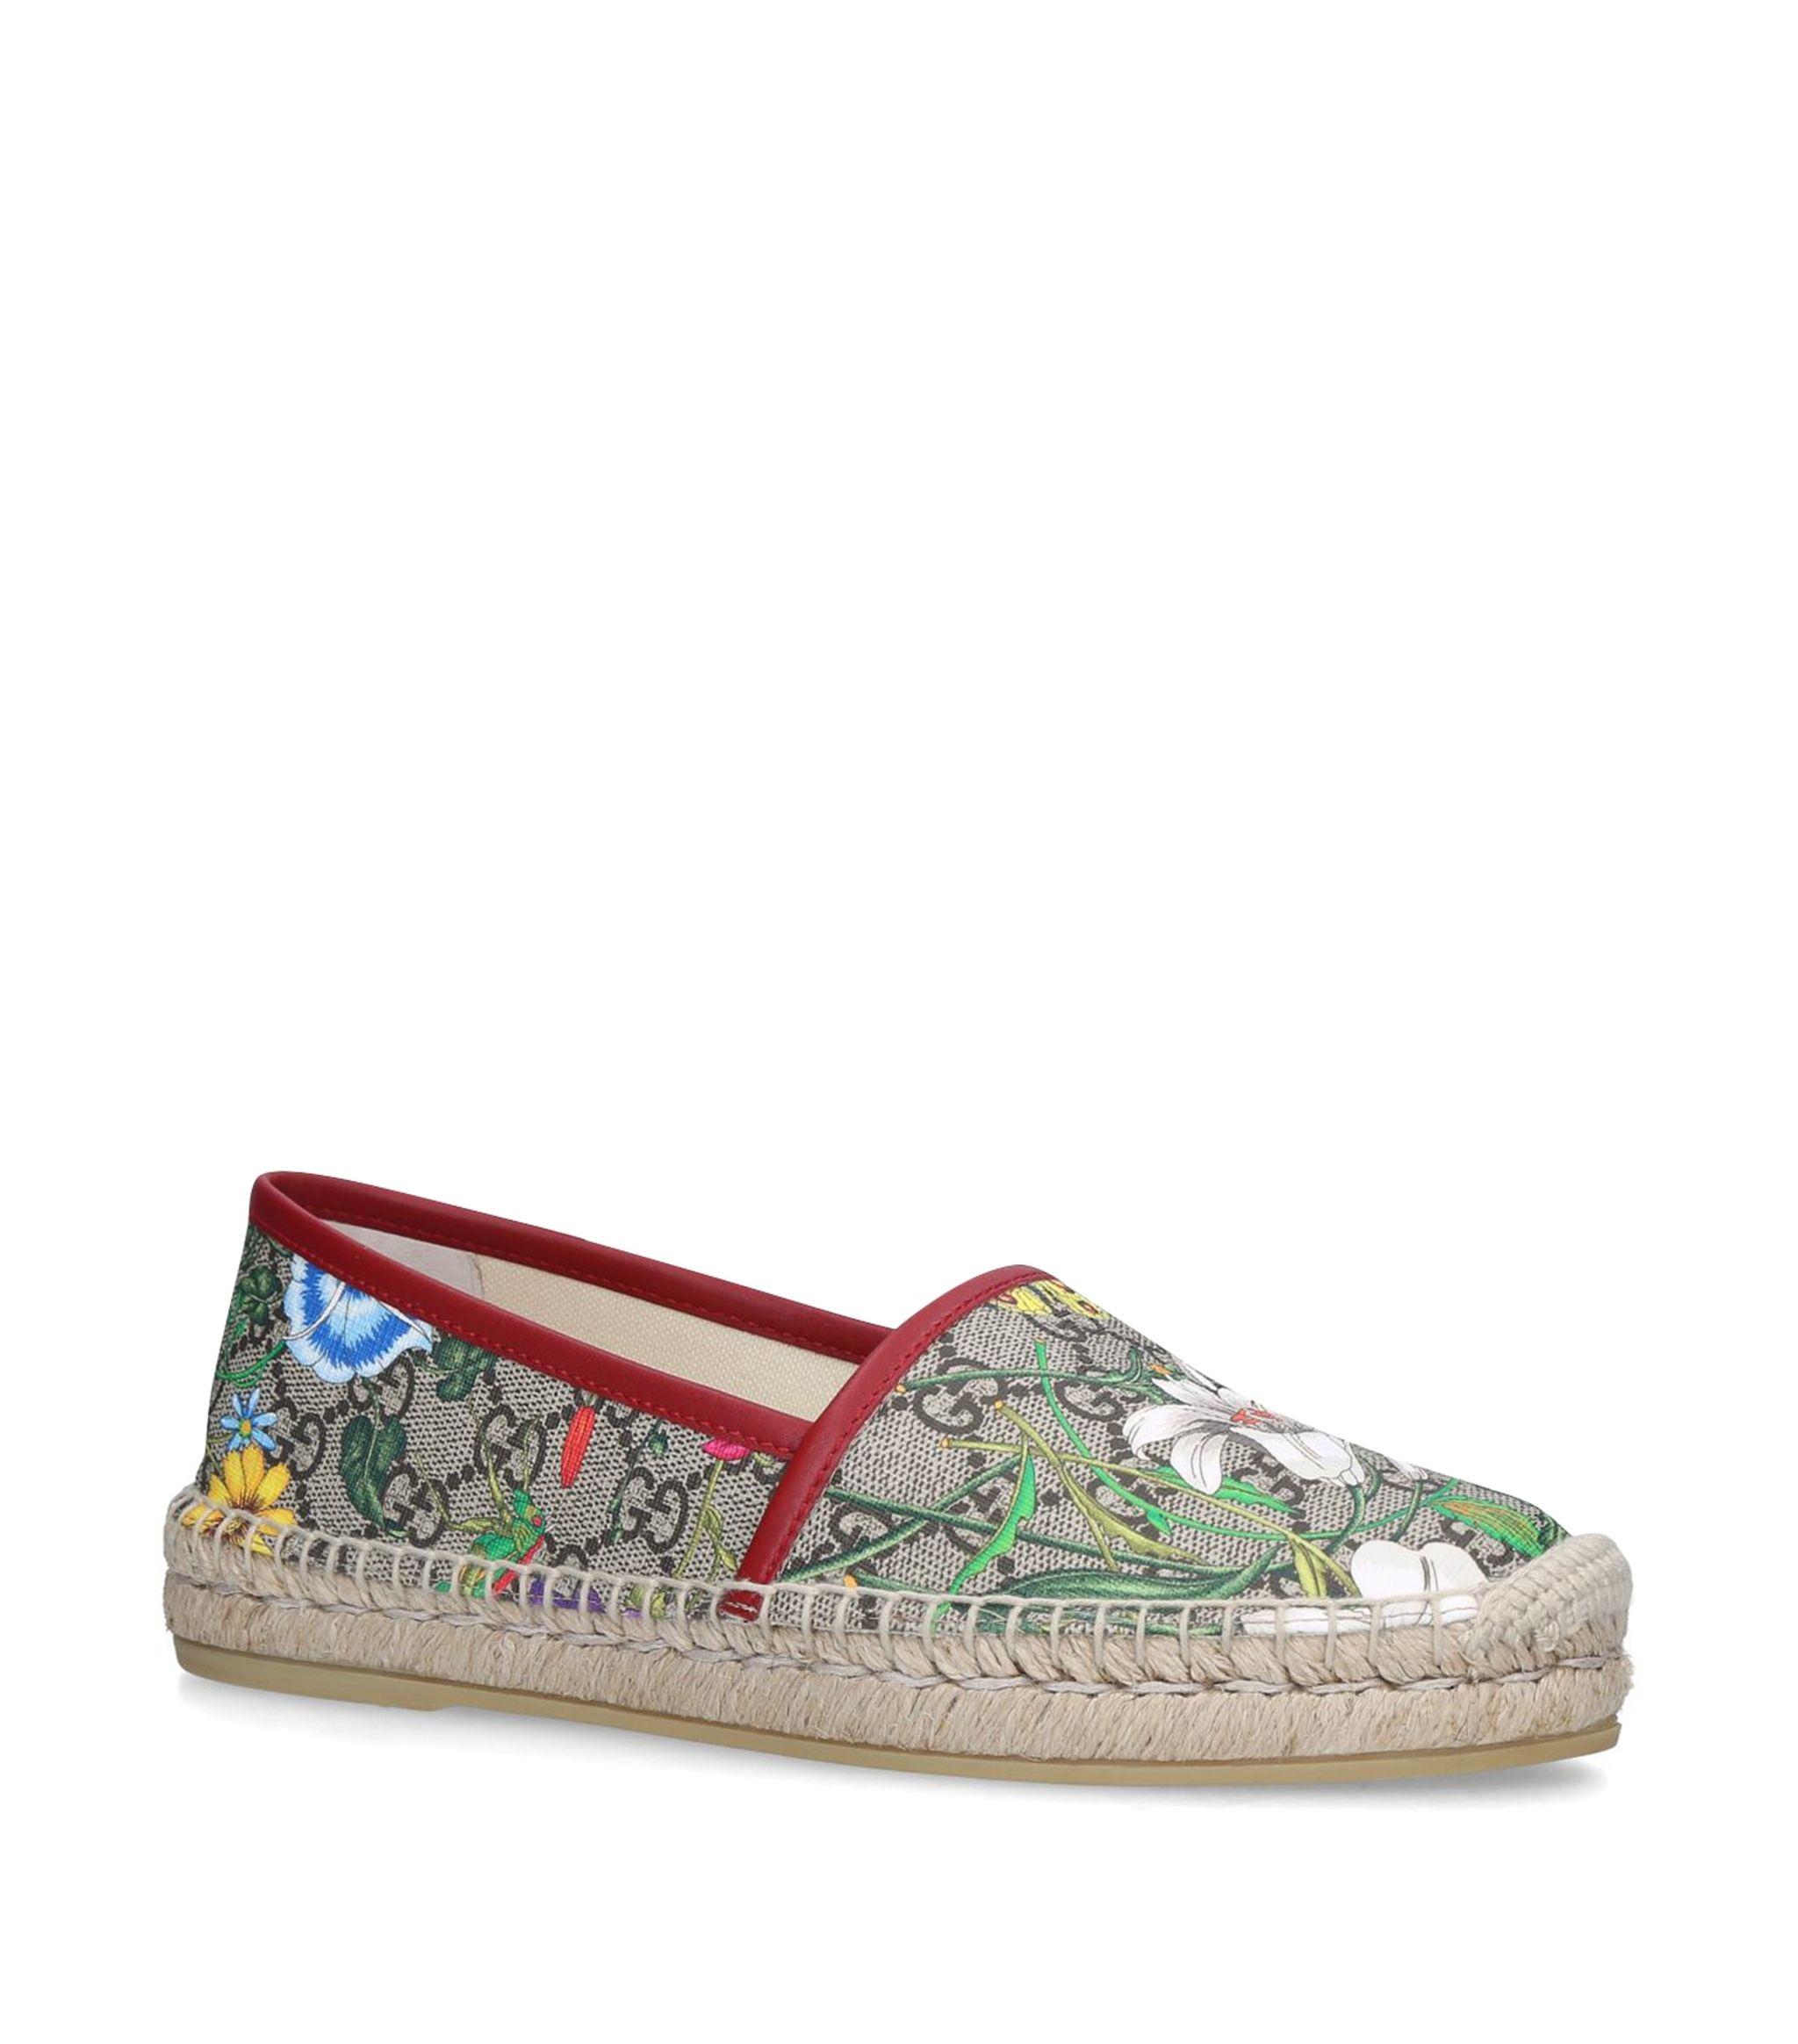 Gucci Gg Supreme Floral Espadrilles in Natural | Lyst